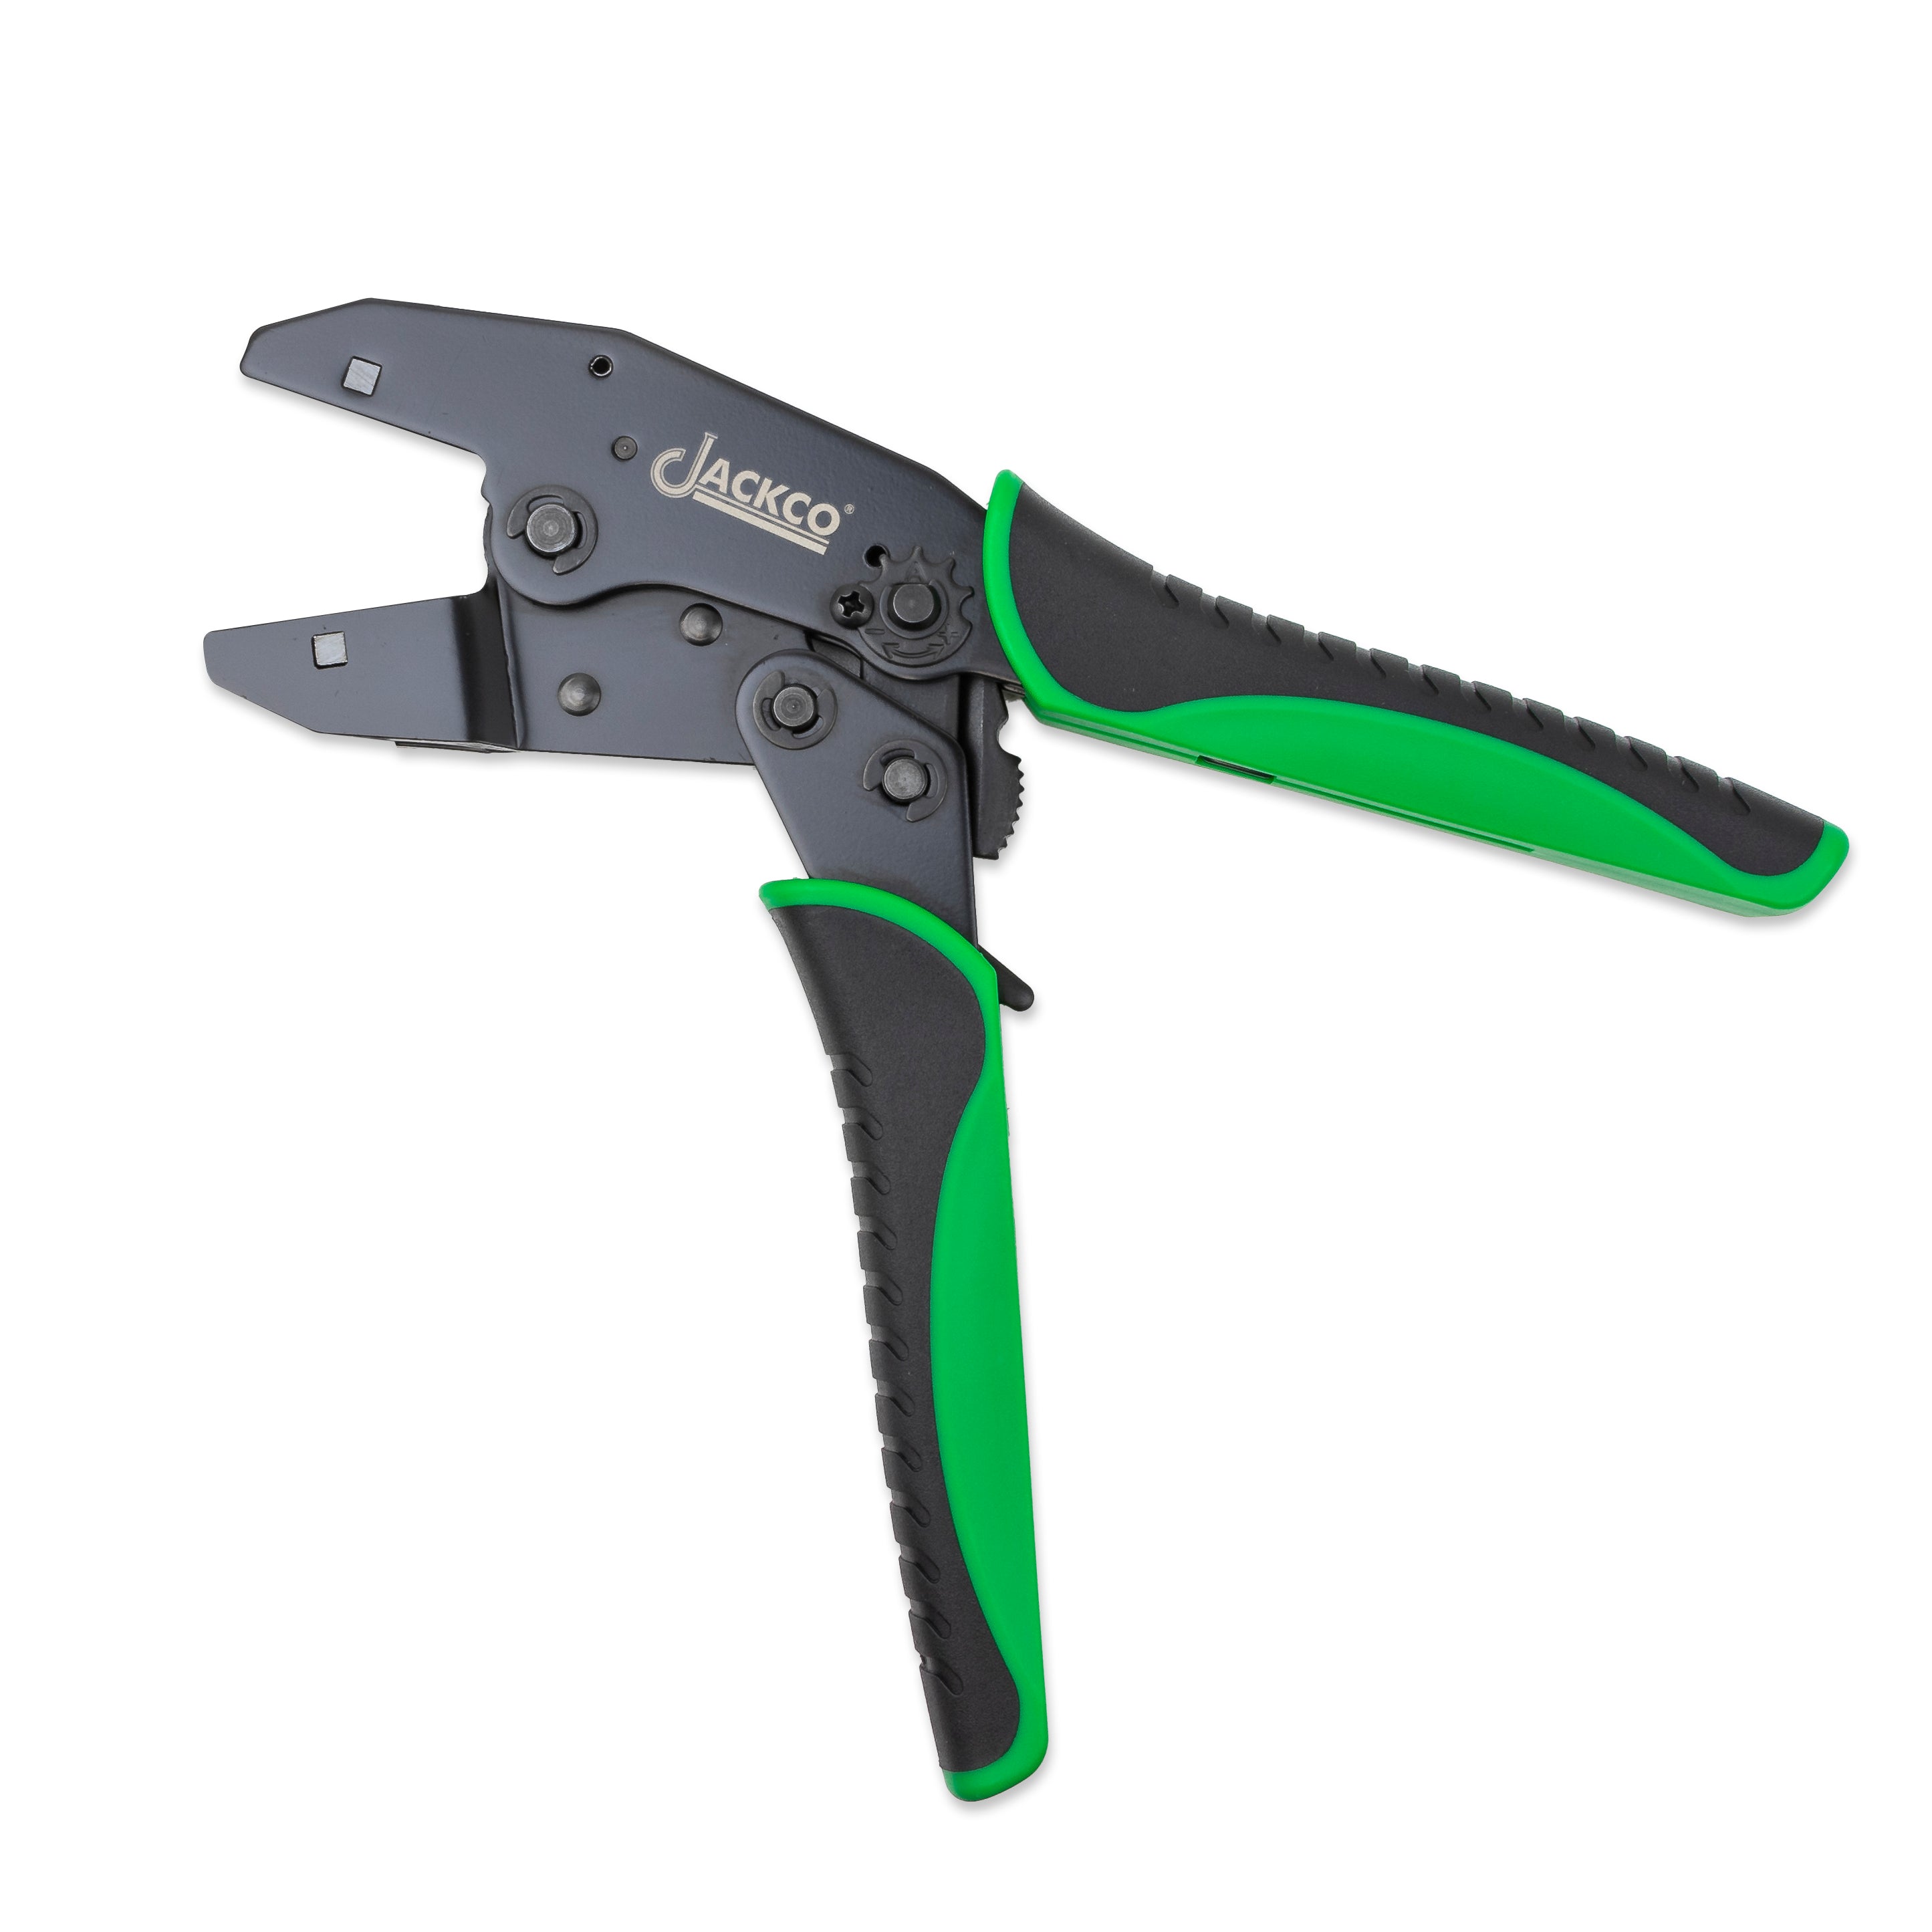 Interchangeable Die Ratcheting Terminal Crimper (Steel) - Frame Only